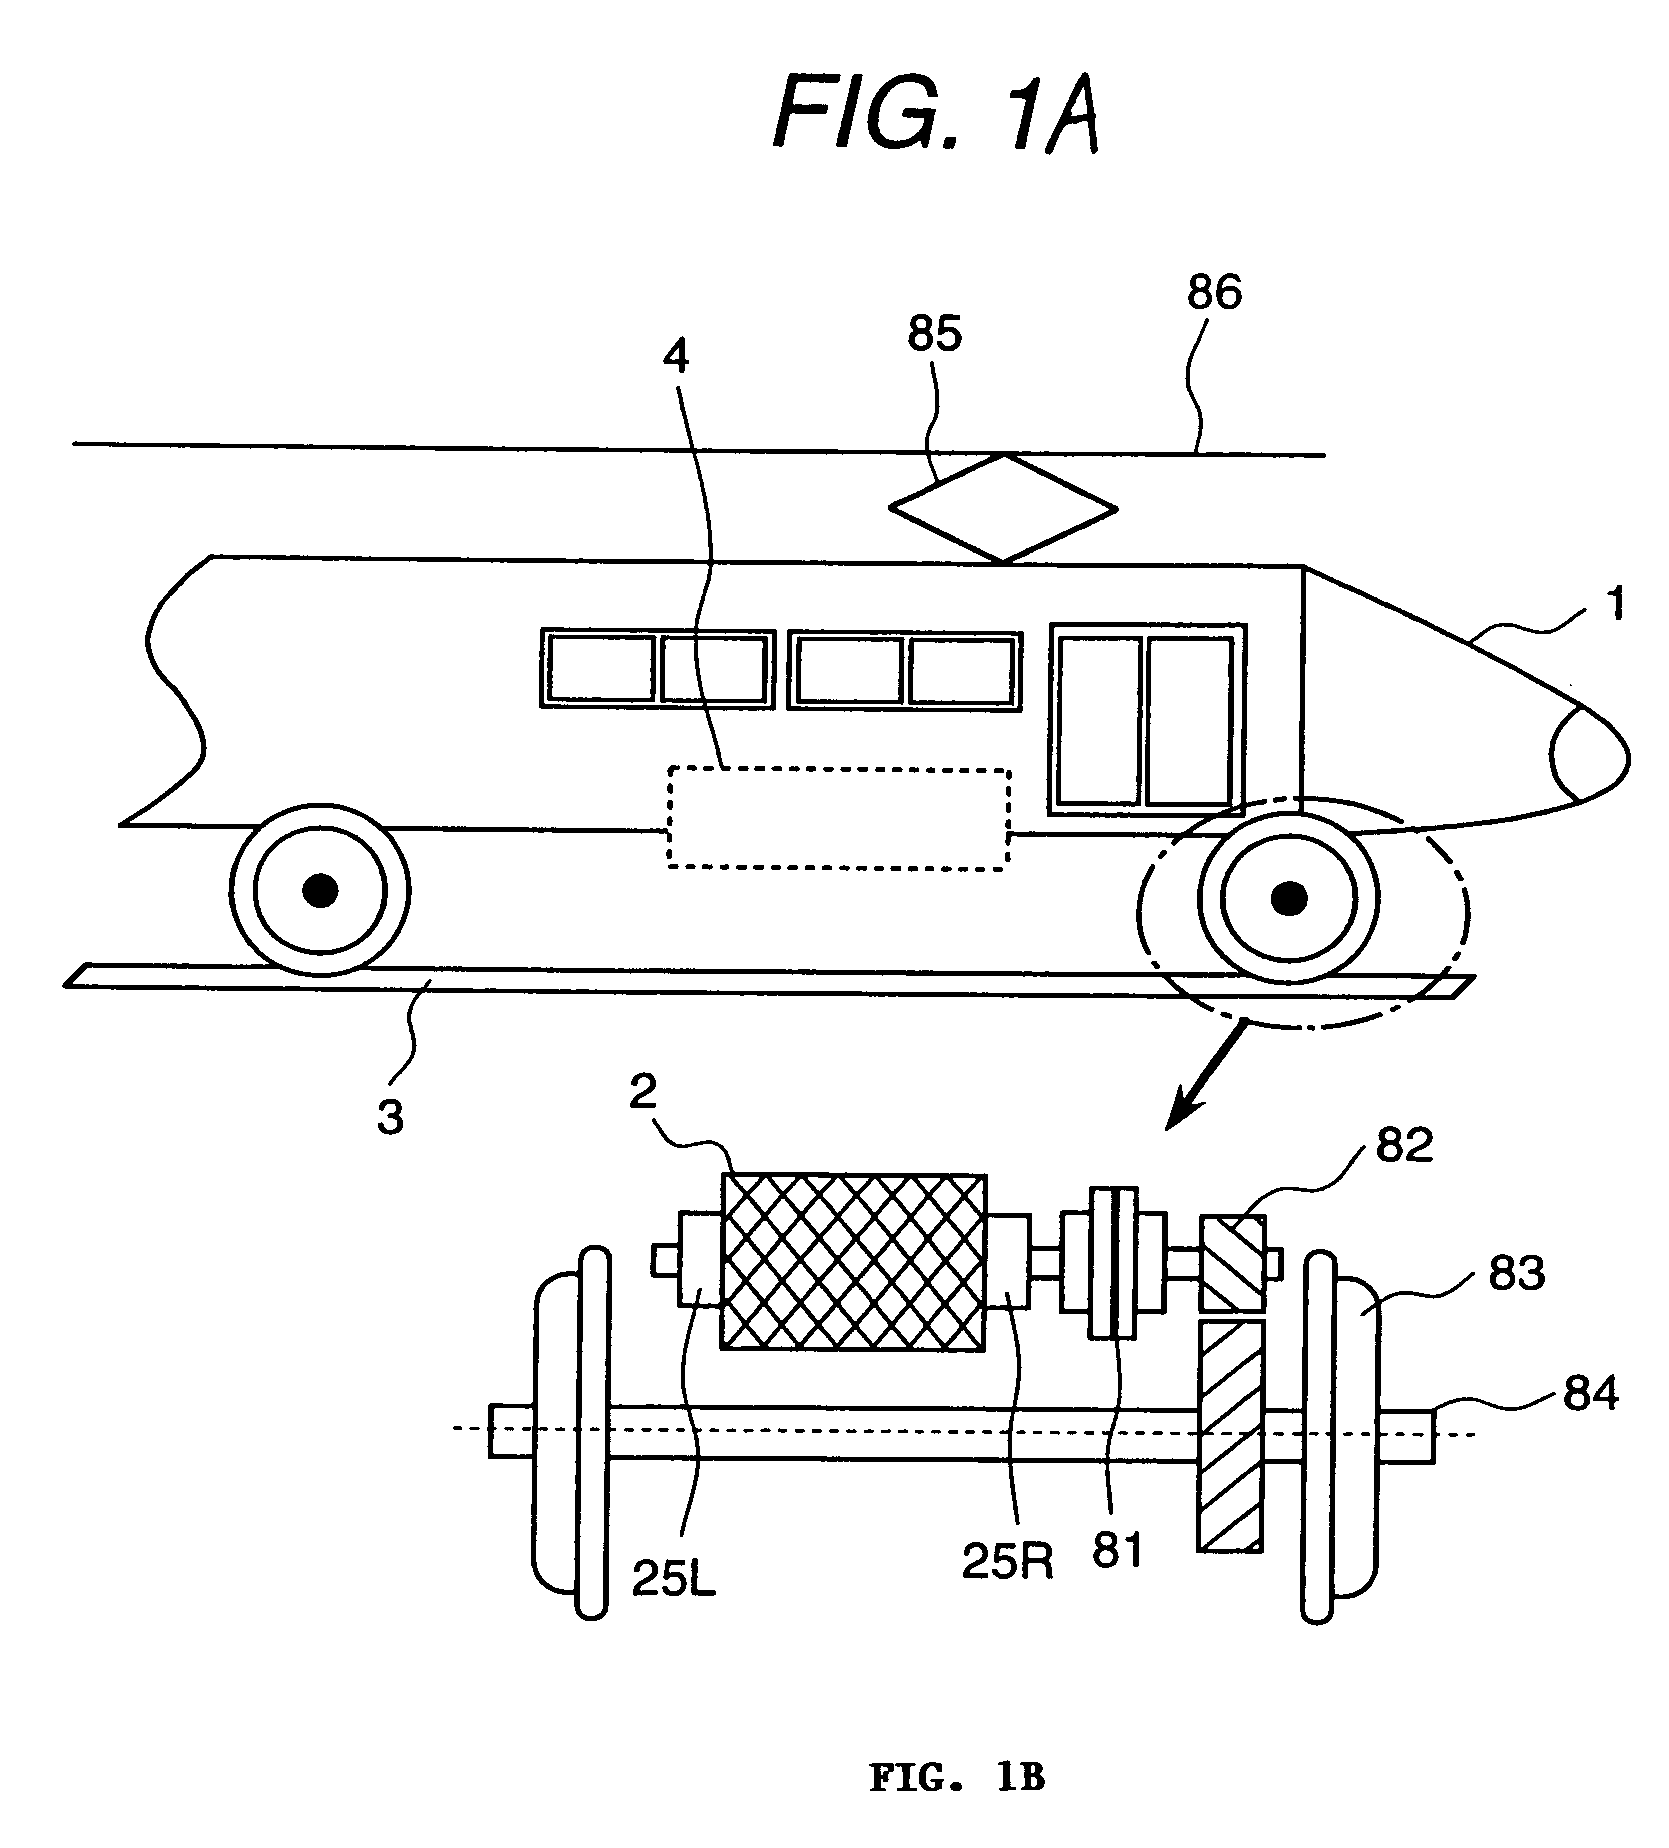 Dynamo-electric machine having a rotor with first and second axially or rotationally displaceable field magnets